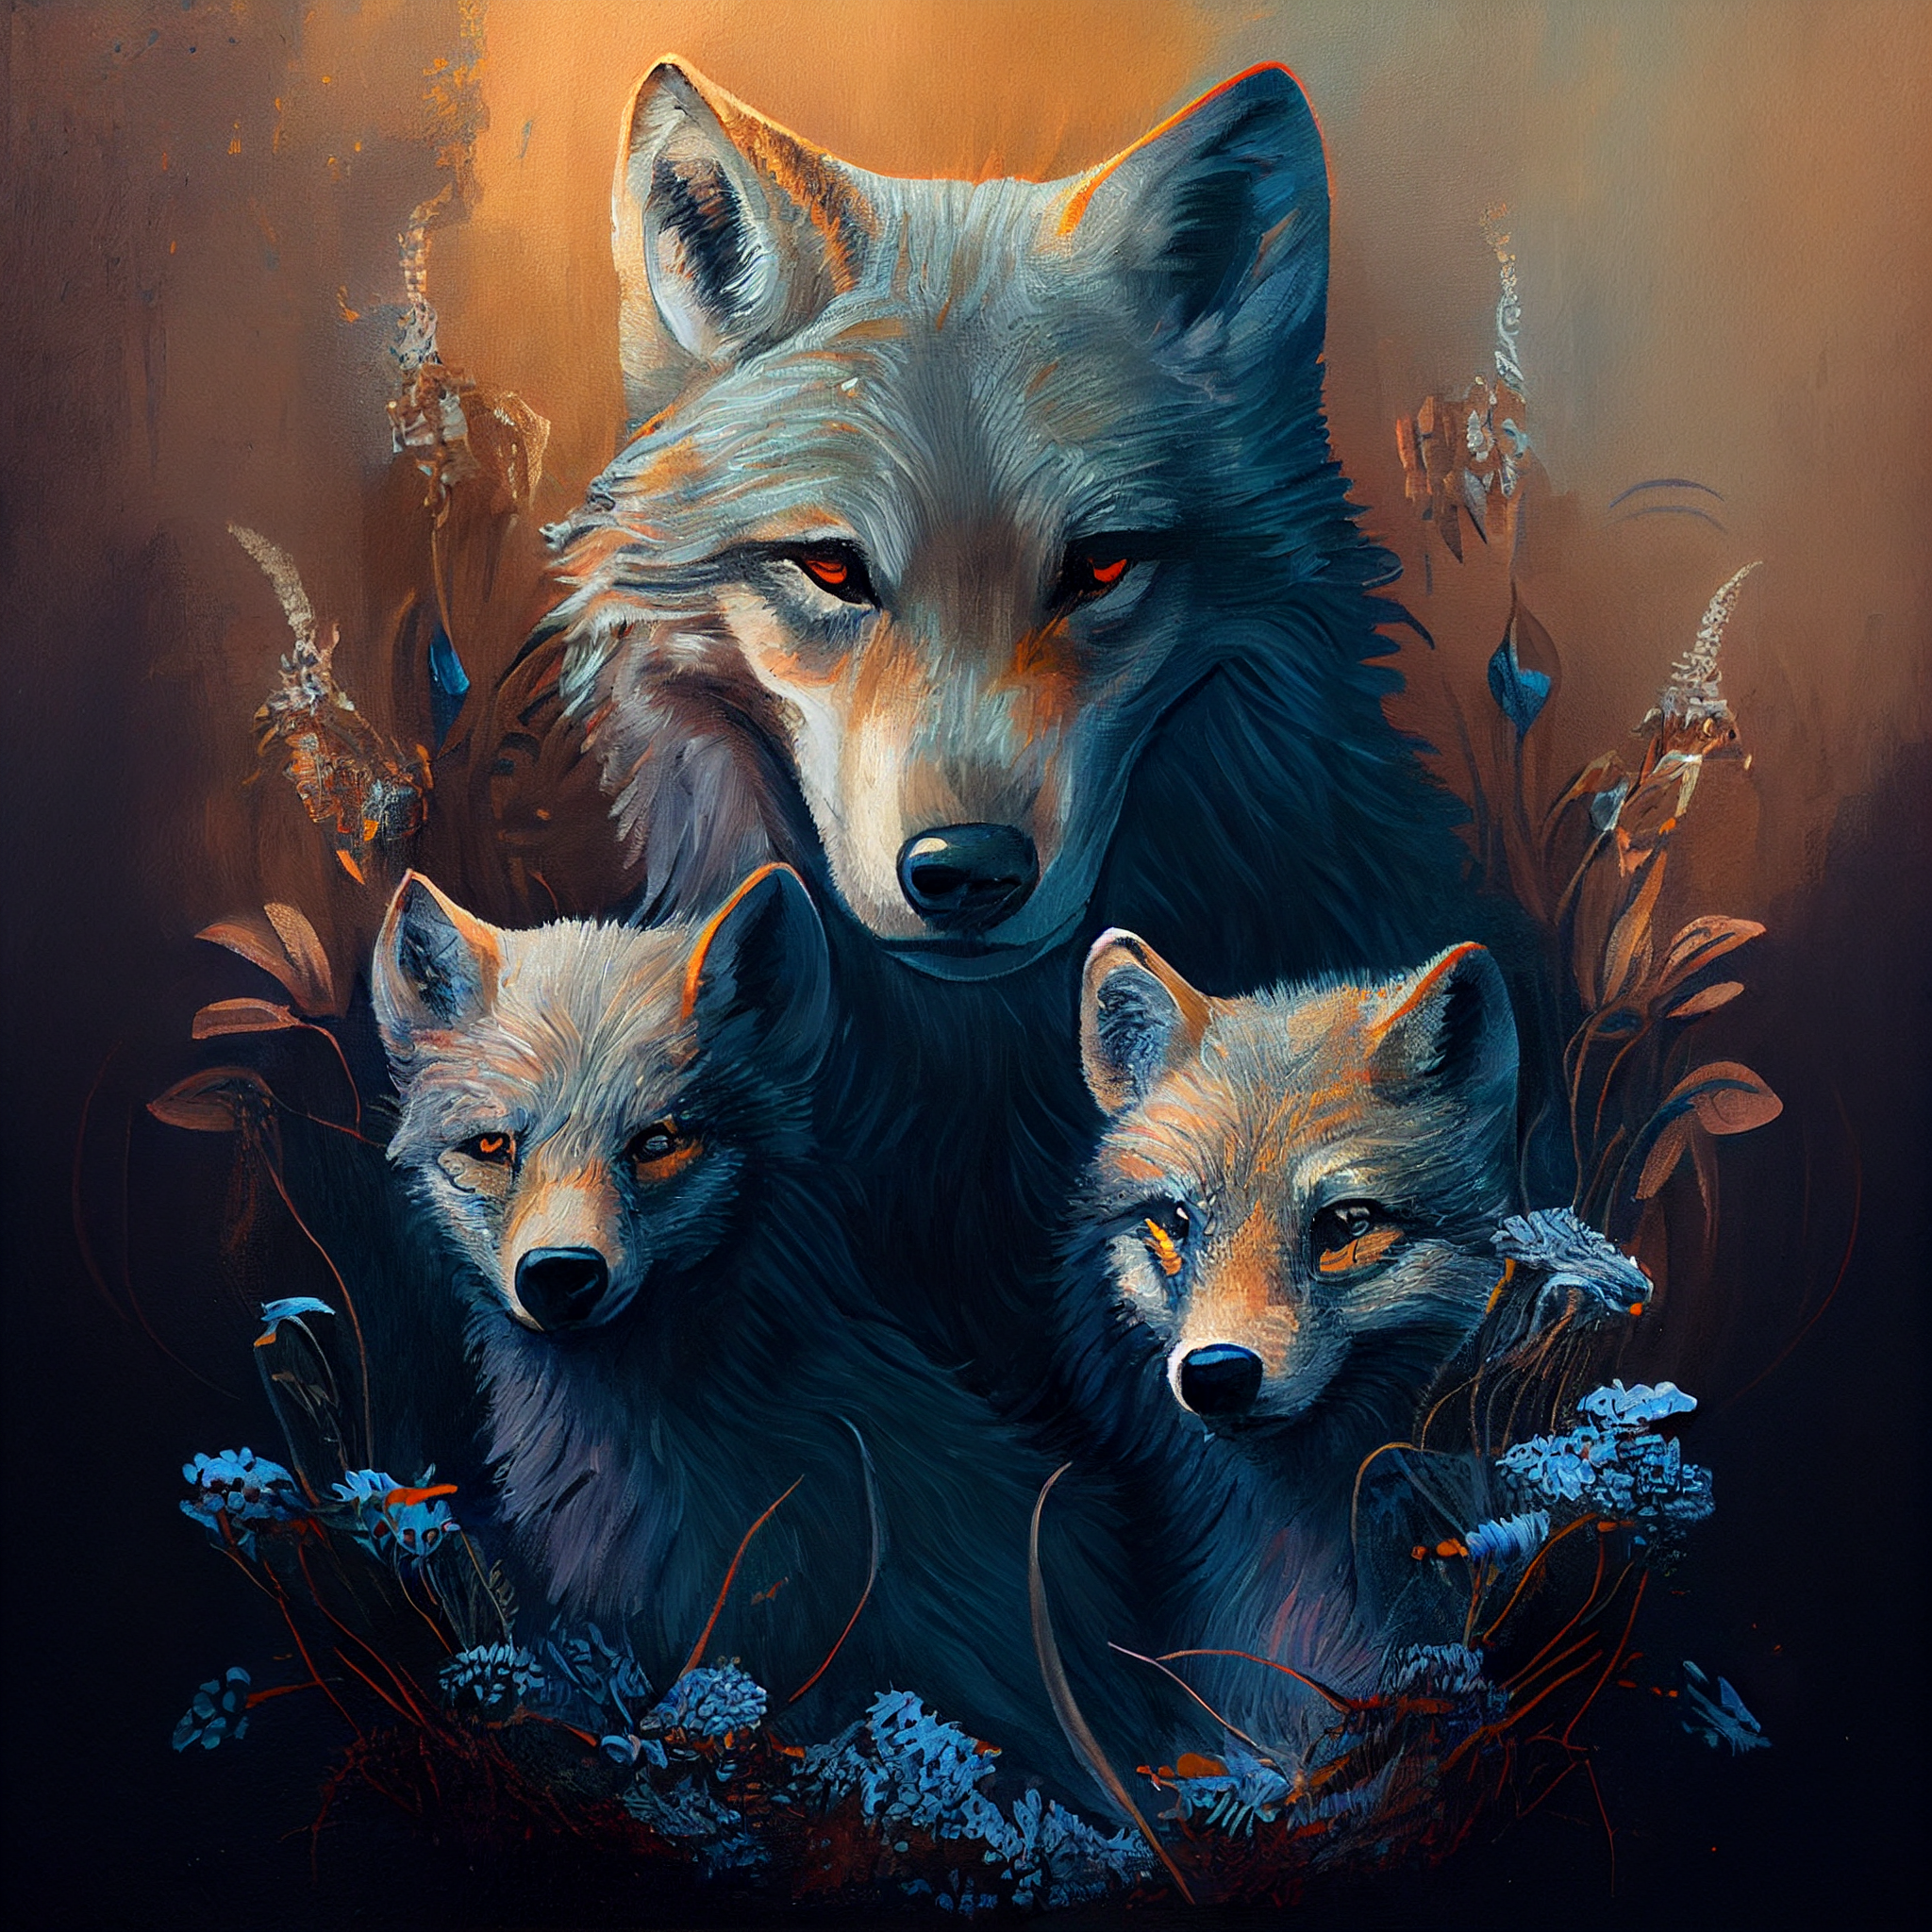 Capture the Beauty of Nature with our Majestic Wolf Mother and Cubs Oil Paint Print